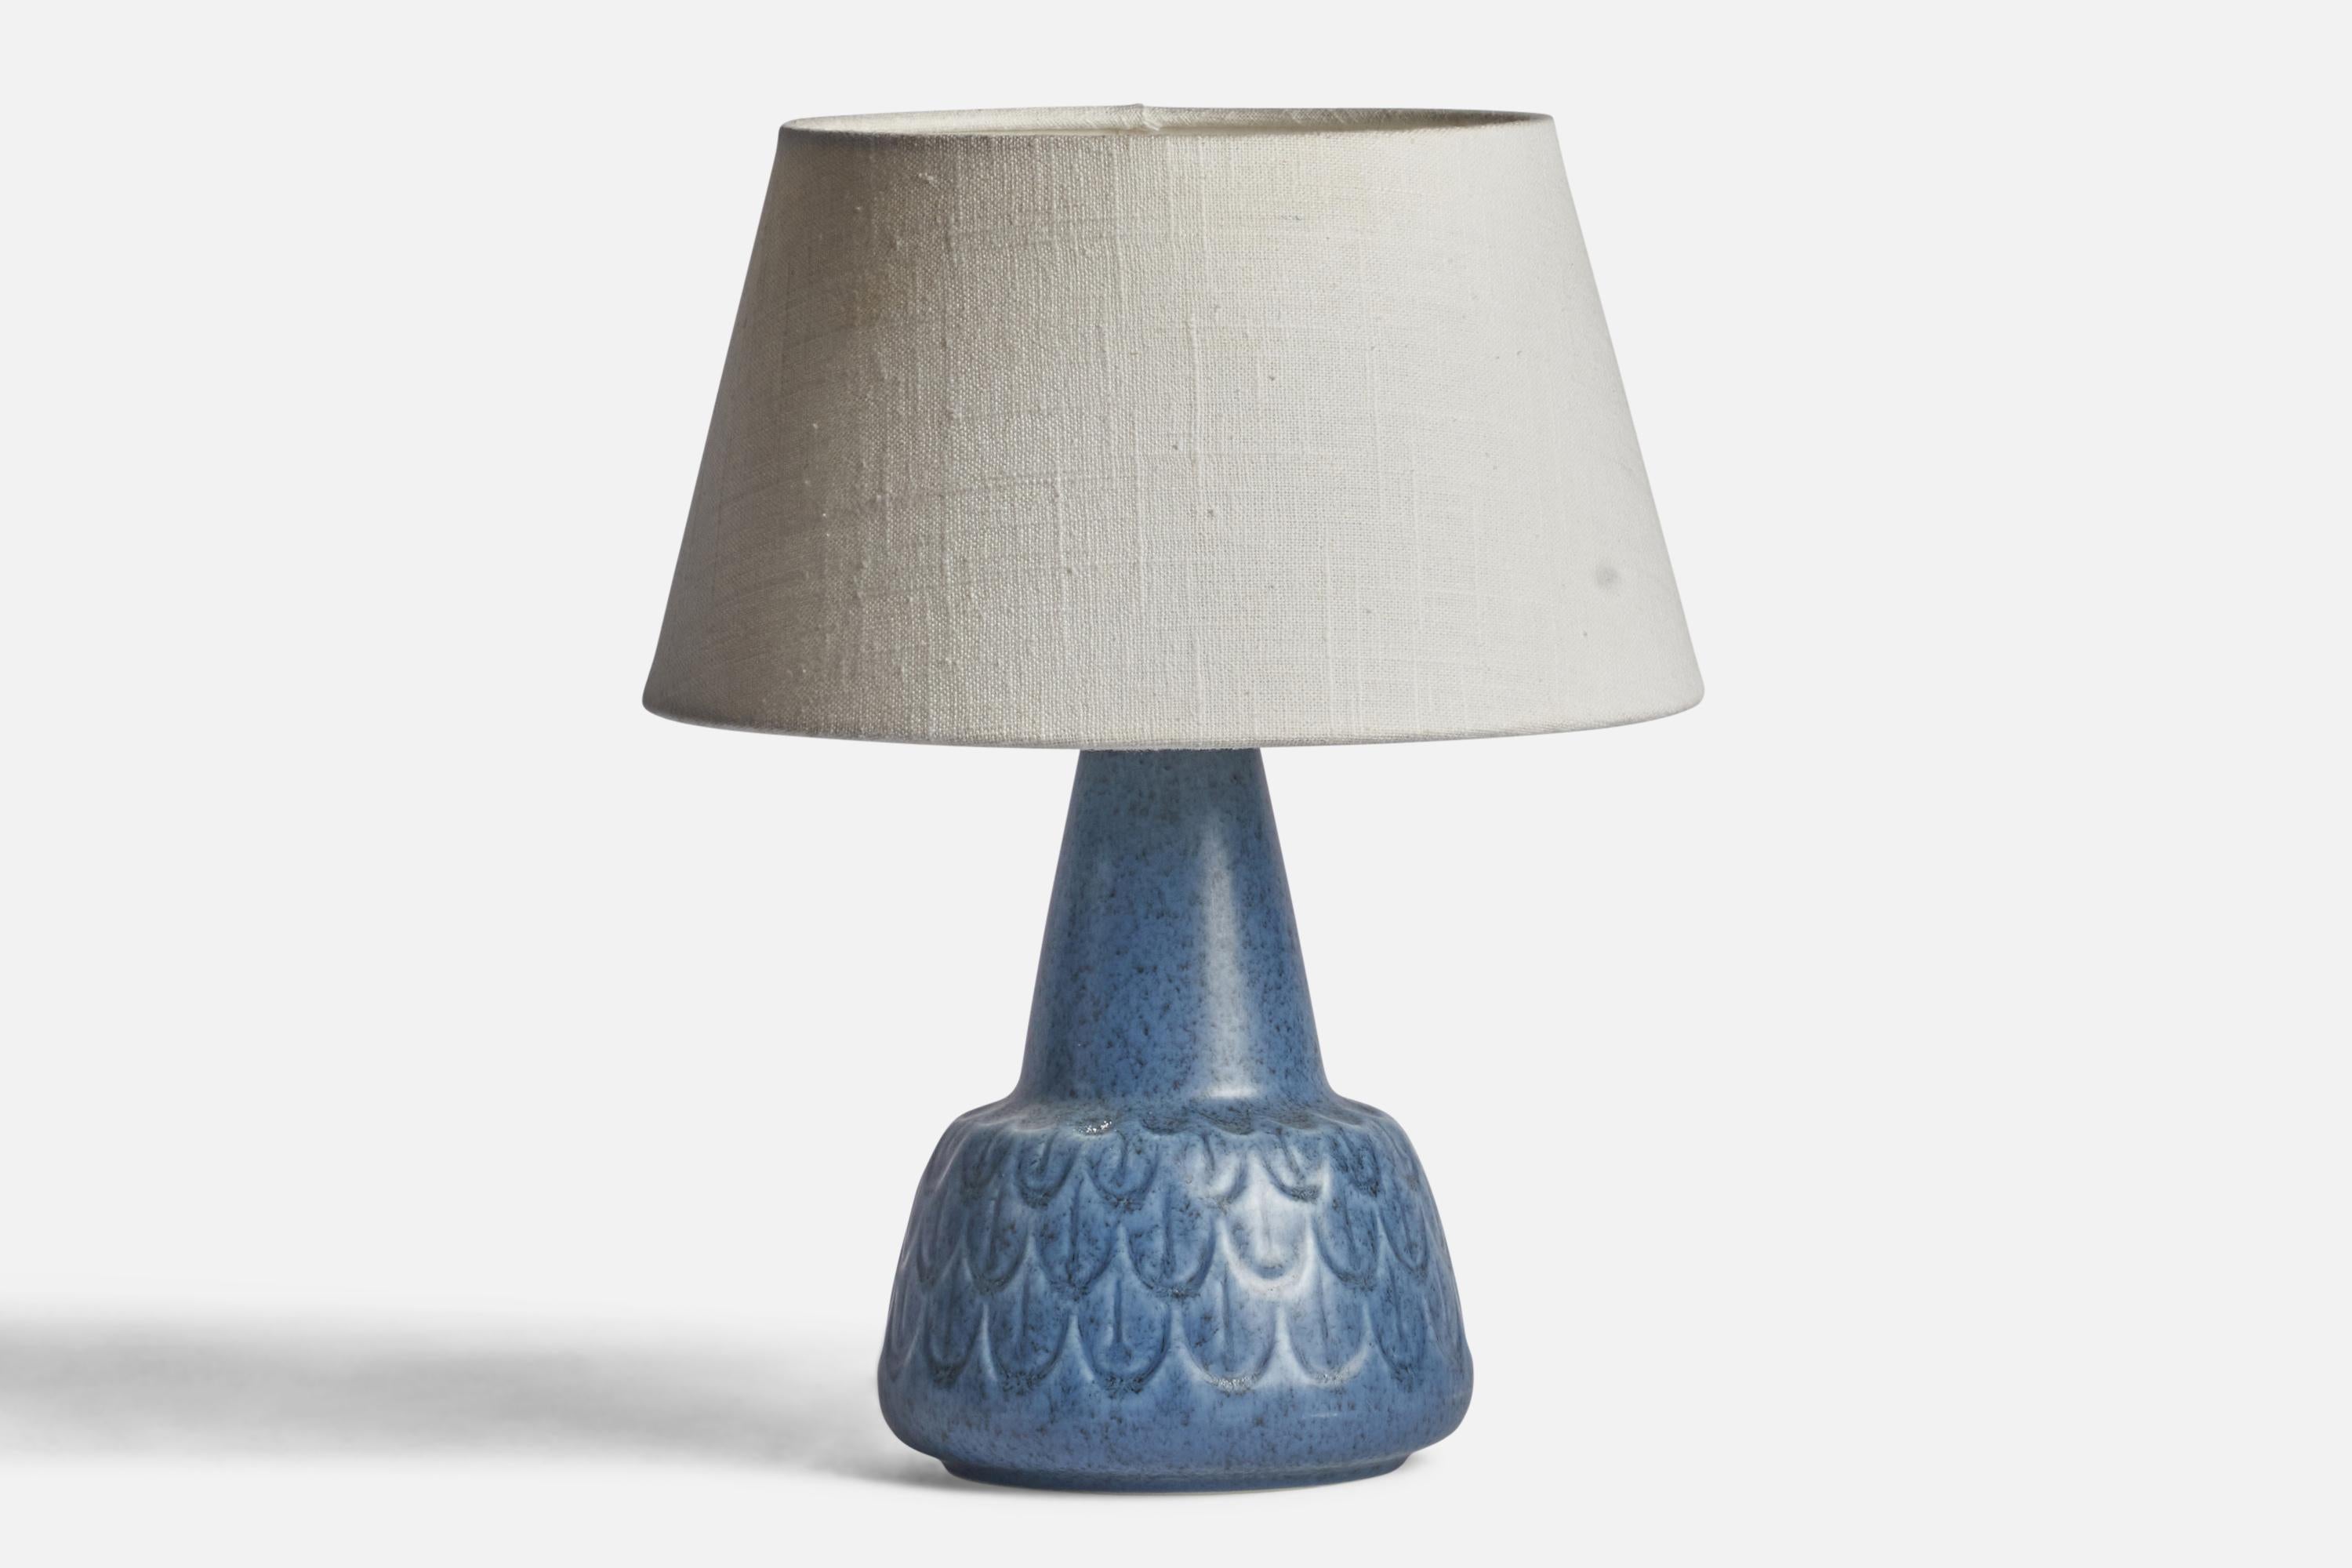 A blue-glazed stoneware table lamp designed and produced by Søholm, Bornholm, Denmark, 1960s.

Dimensions of Lamp (inches): 9.75